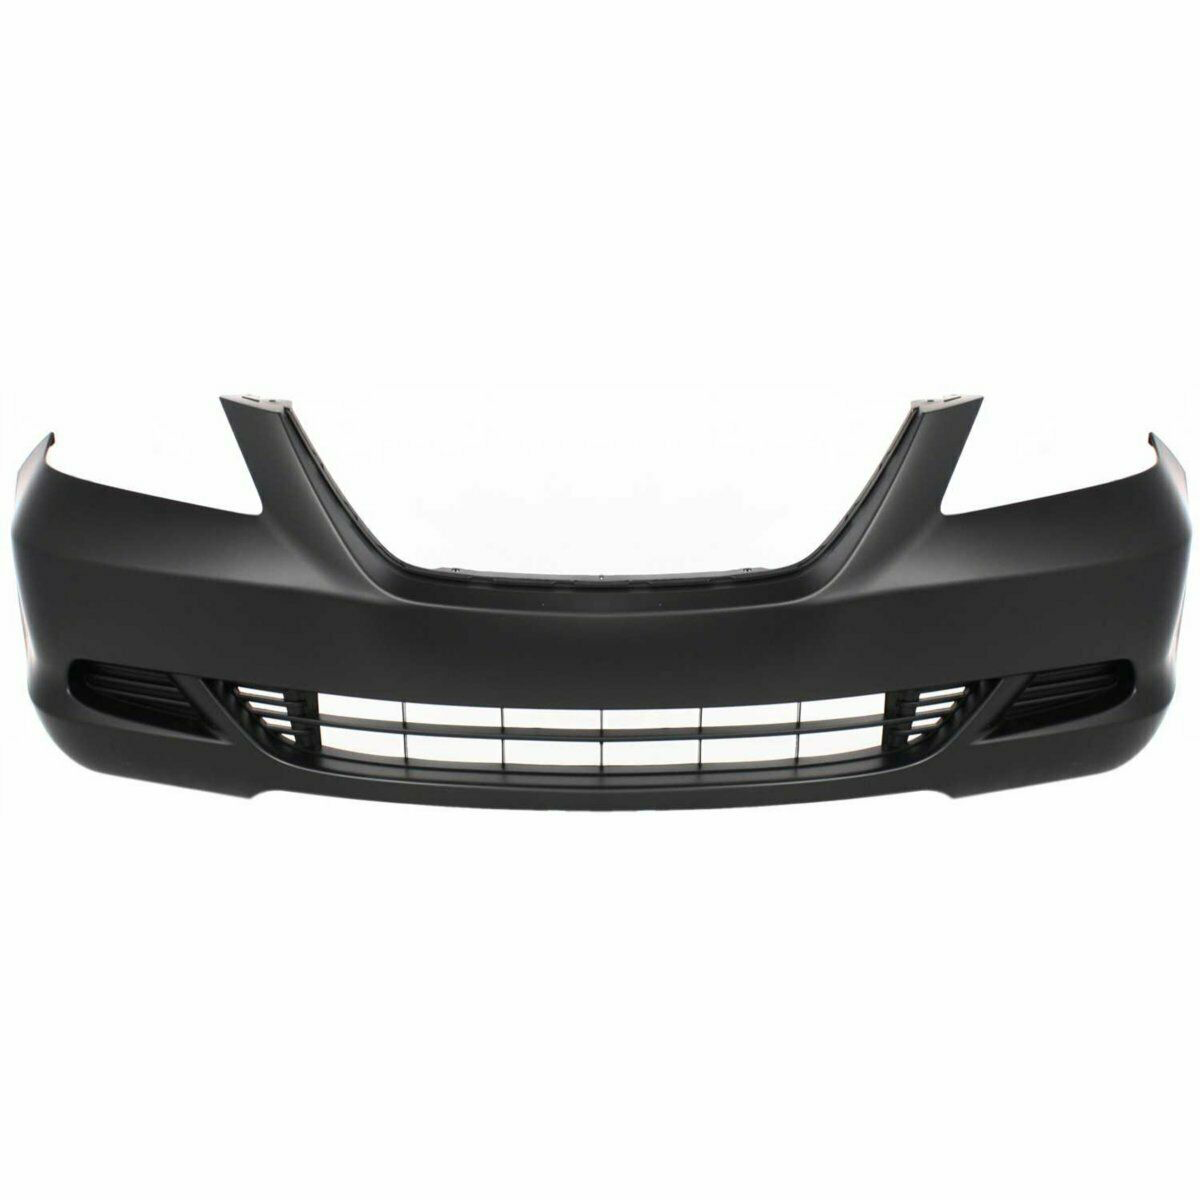 2005-2007 Honda Odyssey (no fog) Front Bumper Painted to Match